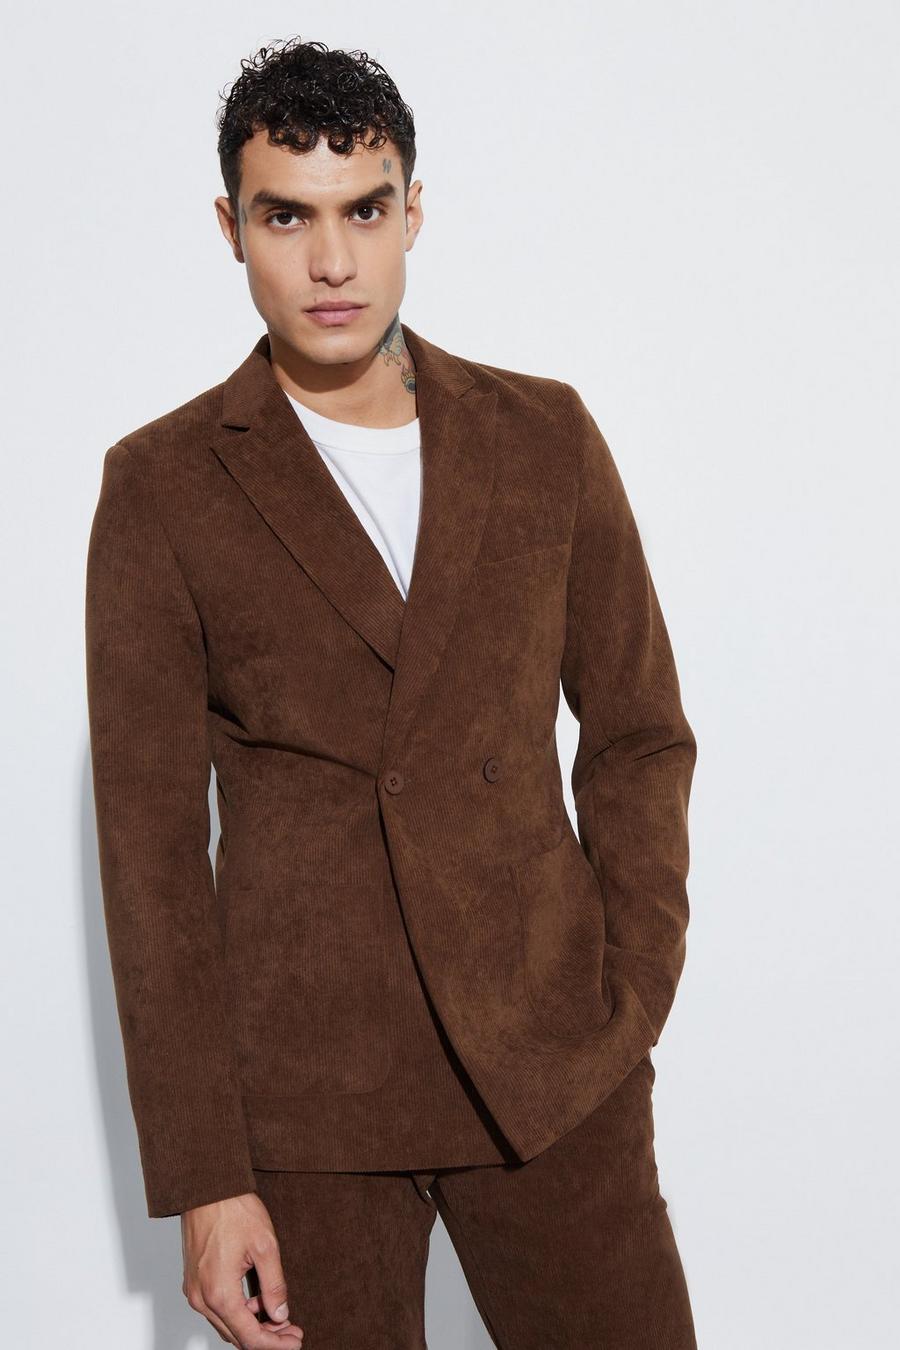 Chocolate Skinny Fit Double Breasted Corduroy Blazer